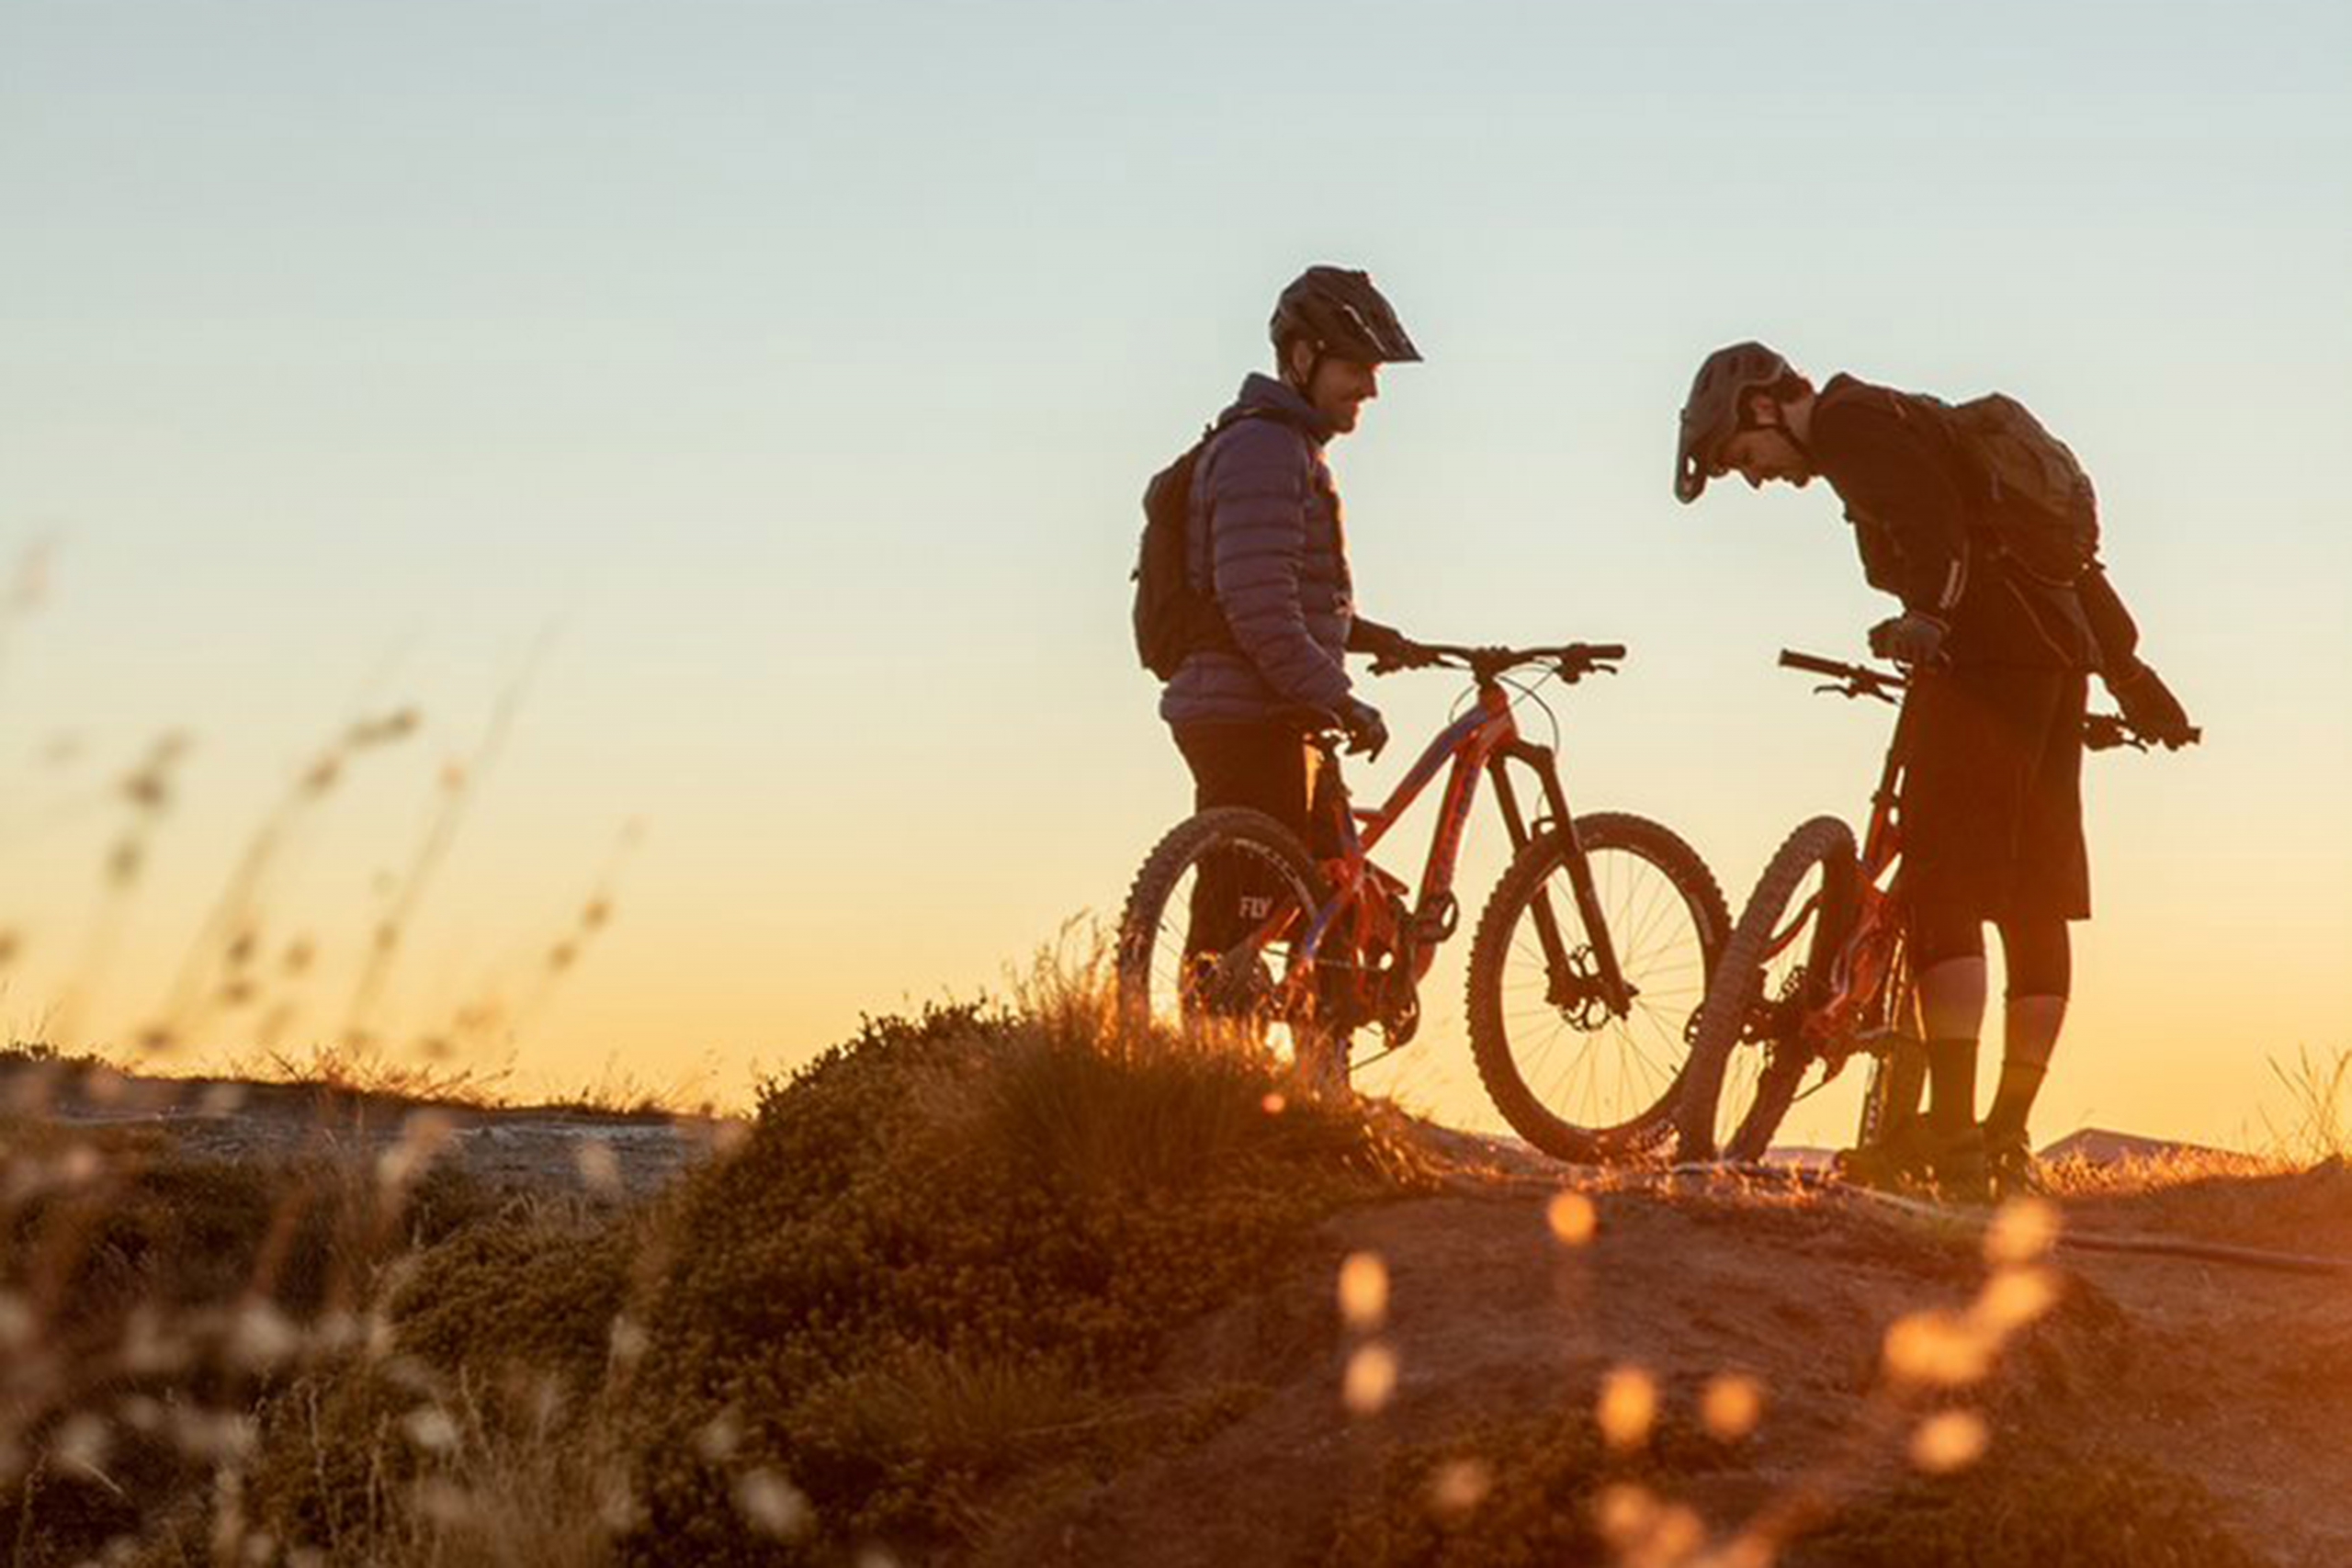 Two mountain bikers on Rossignol bikes at dusk.